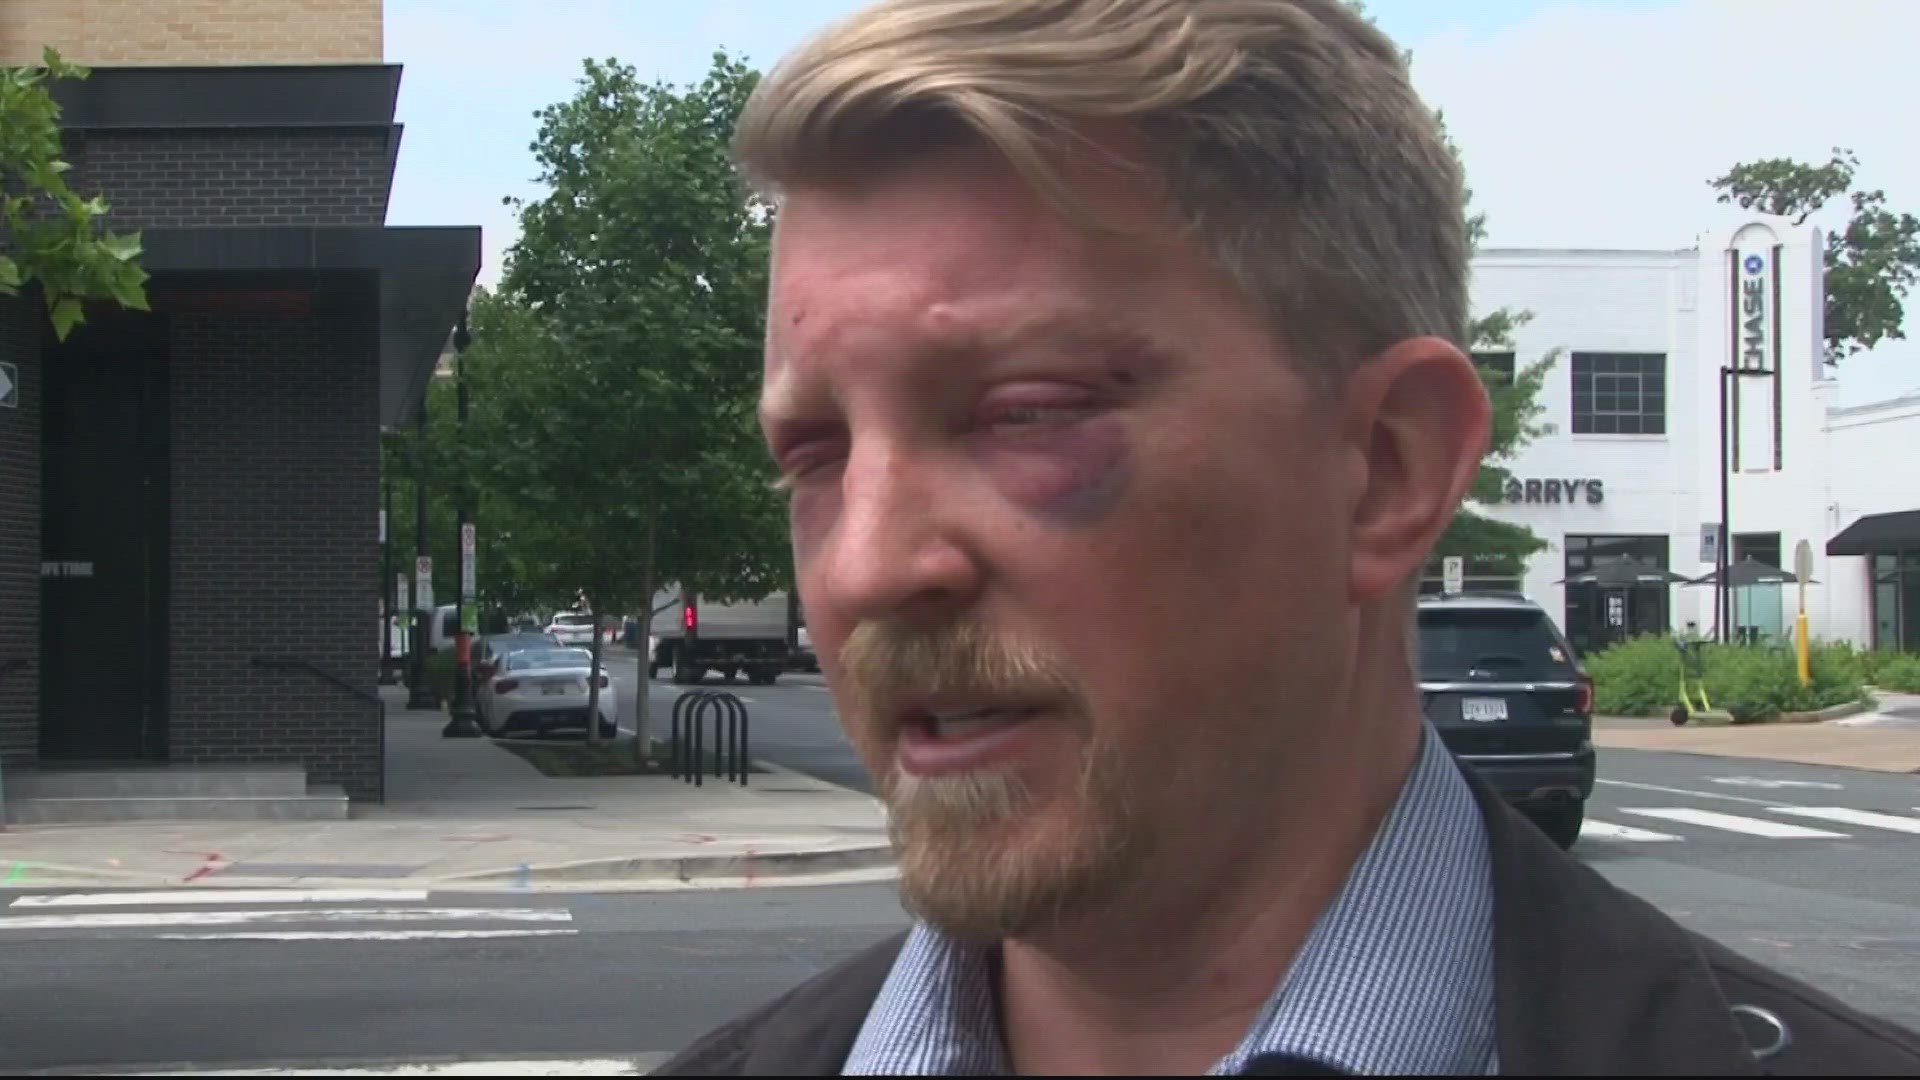 Police are investigating after they say a good Samaritan was beaten by a man after trying to stop that same man from allegedly assaulting a woman.